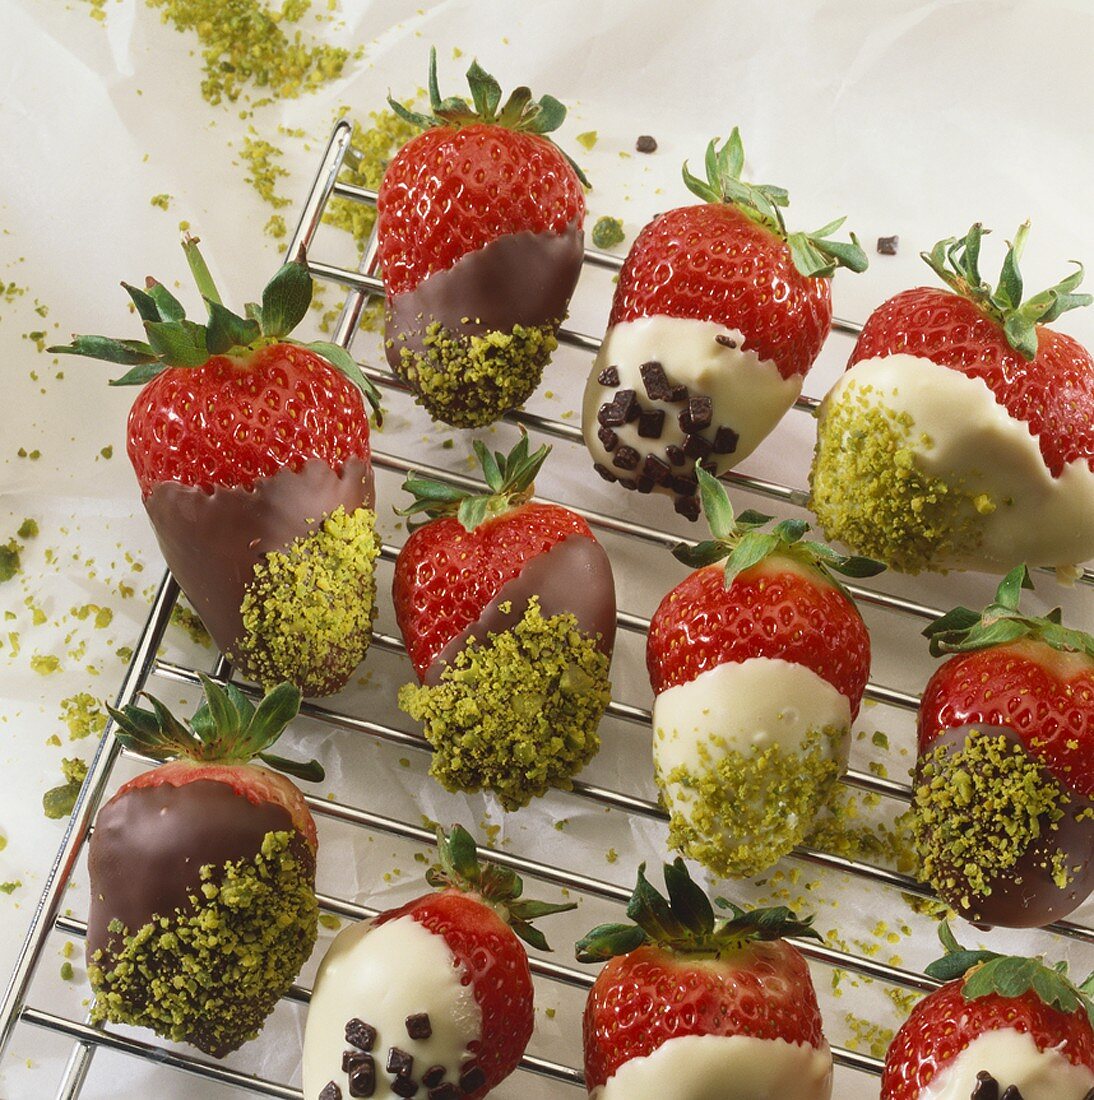 Chocolate- and pistachio-dipped strawberries